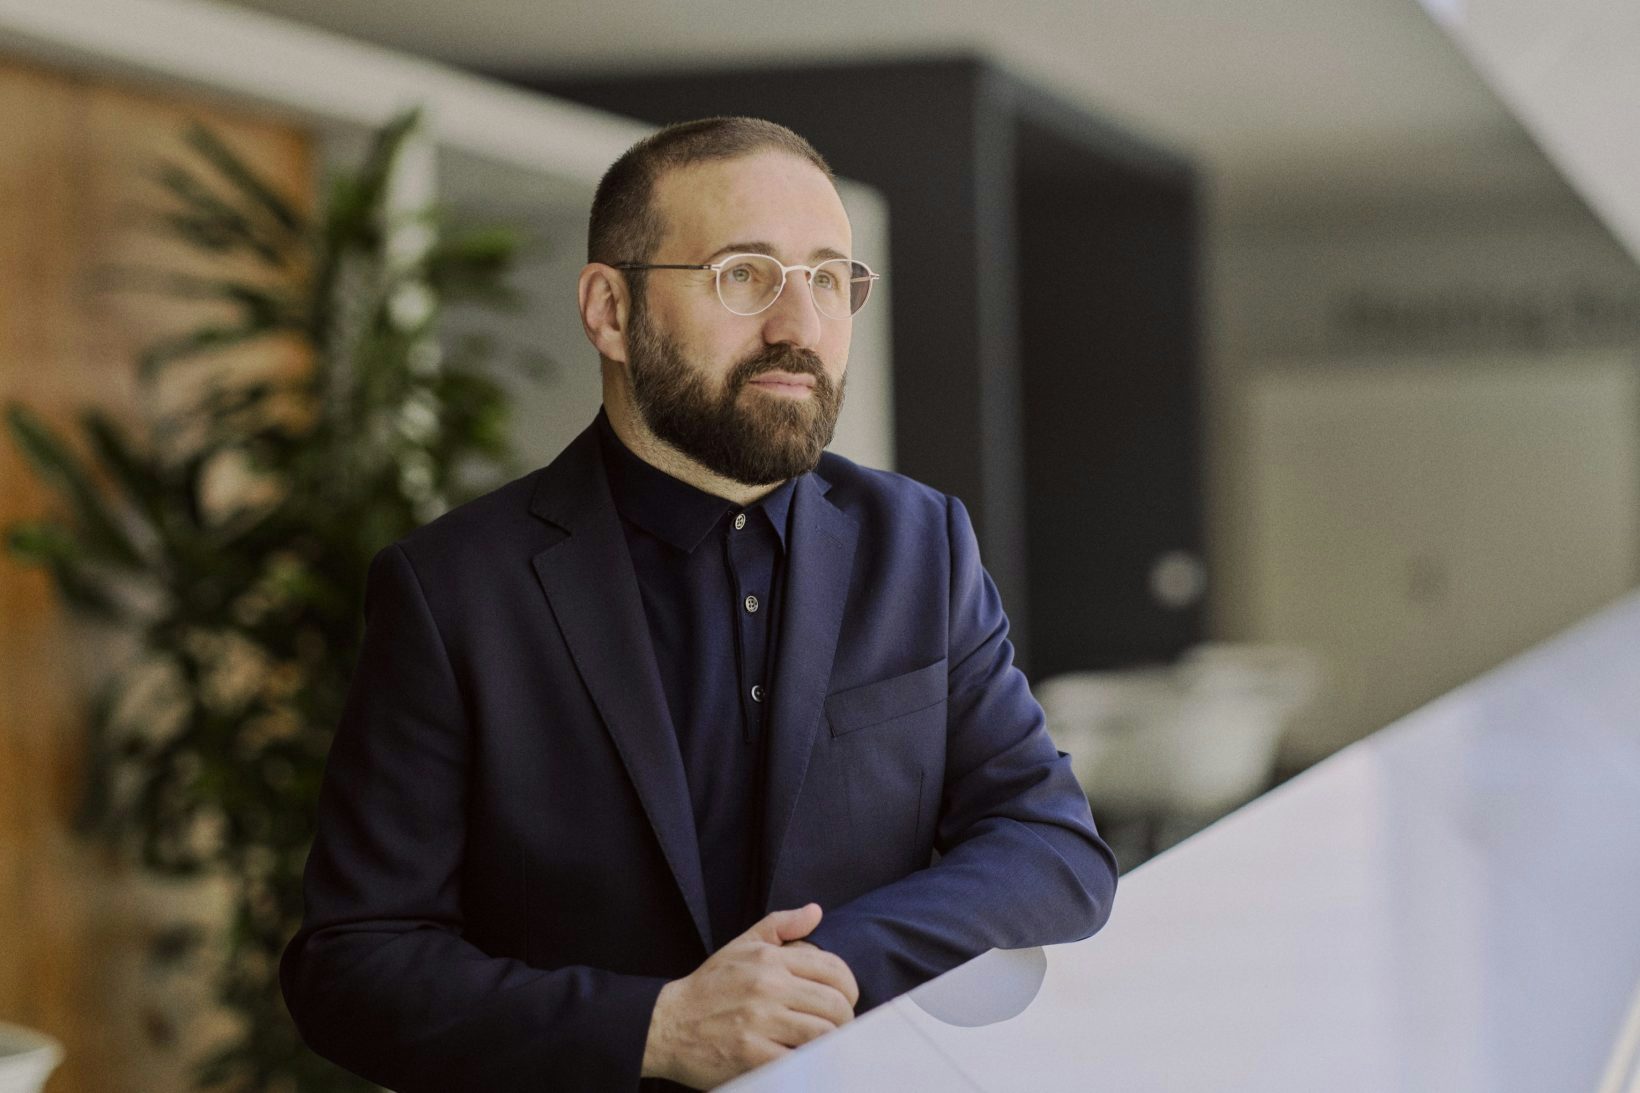 Vincenzo De Bellis, Director of Art Basel: “The New Generation Buys Art for the Experience”